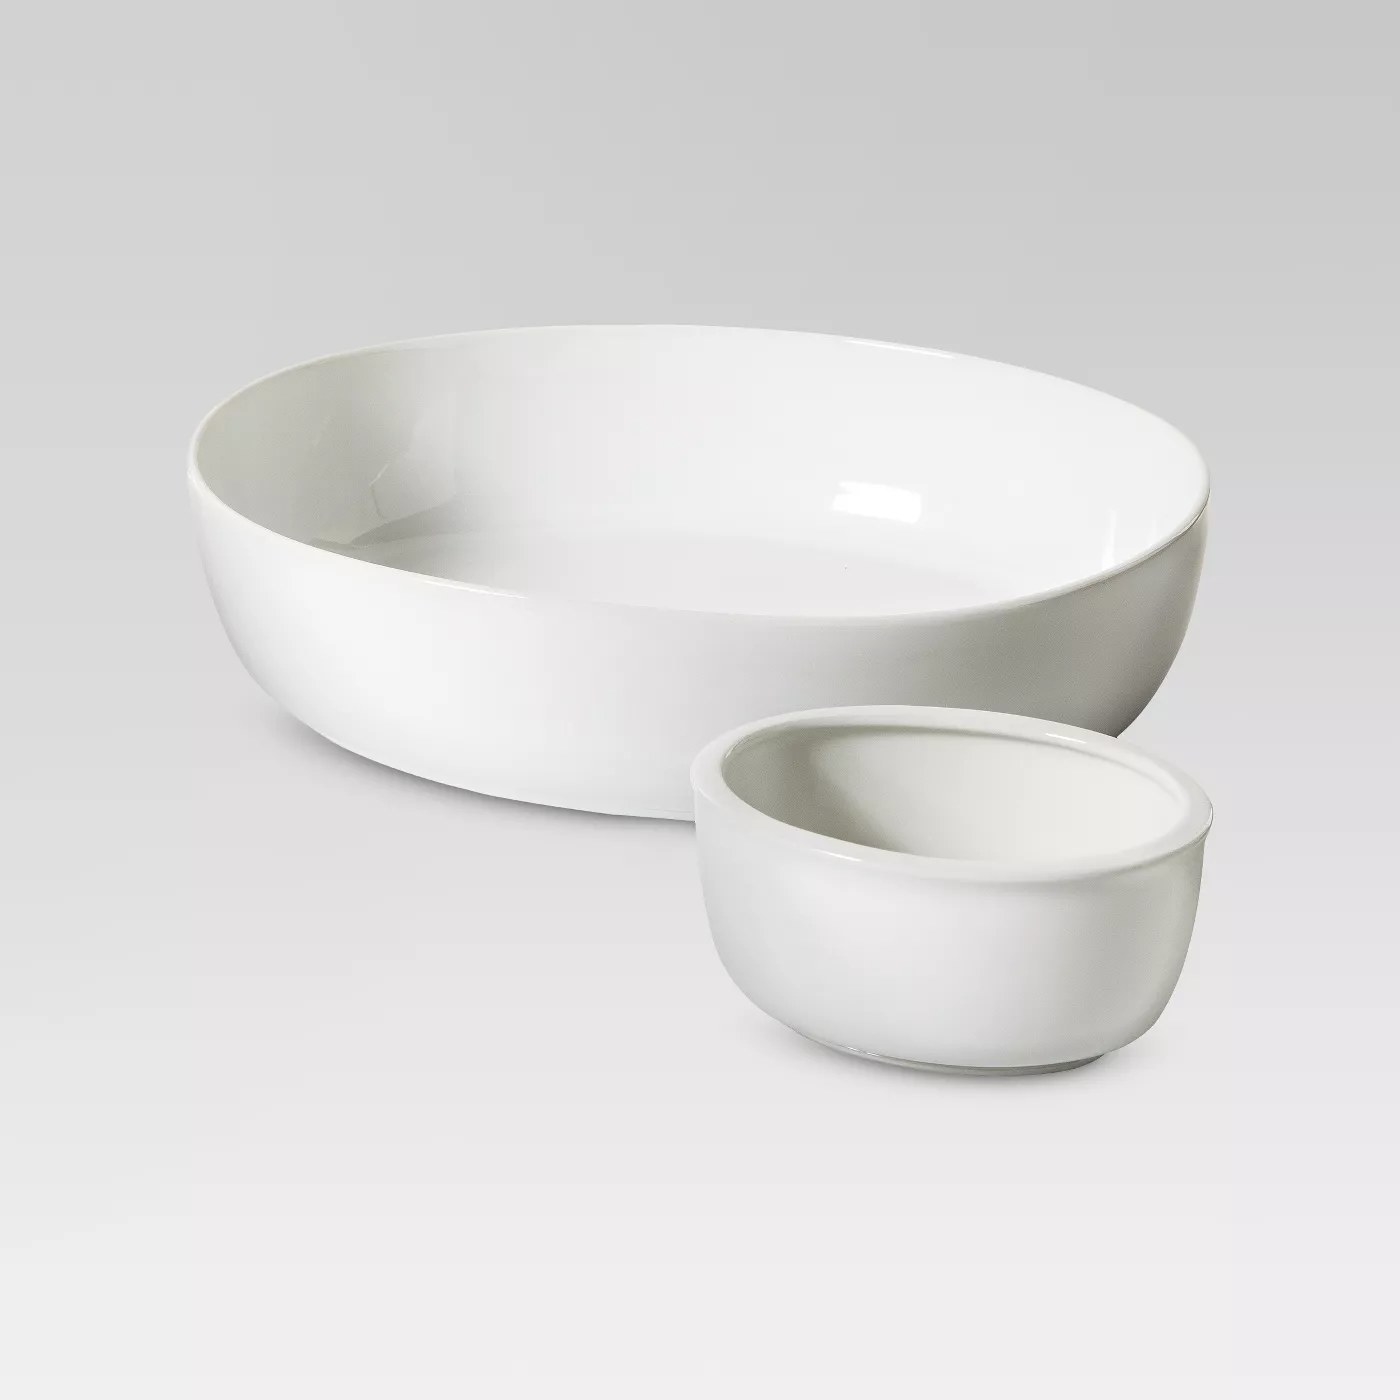 The white chip and dip bowl set